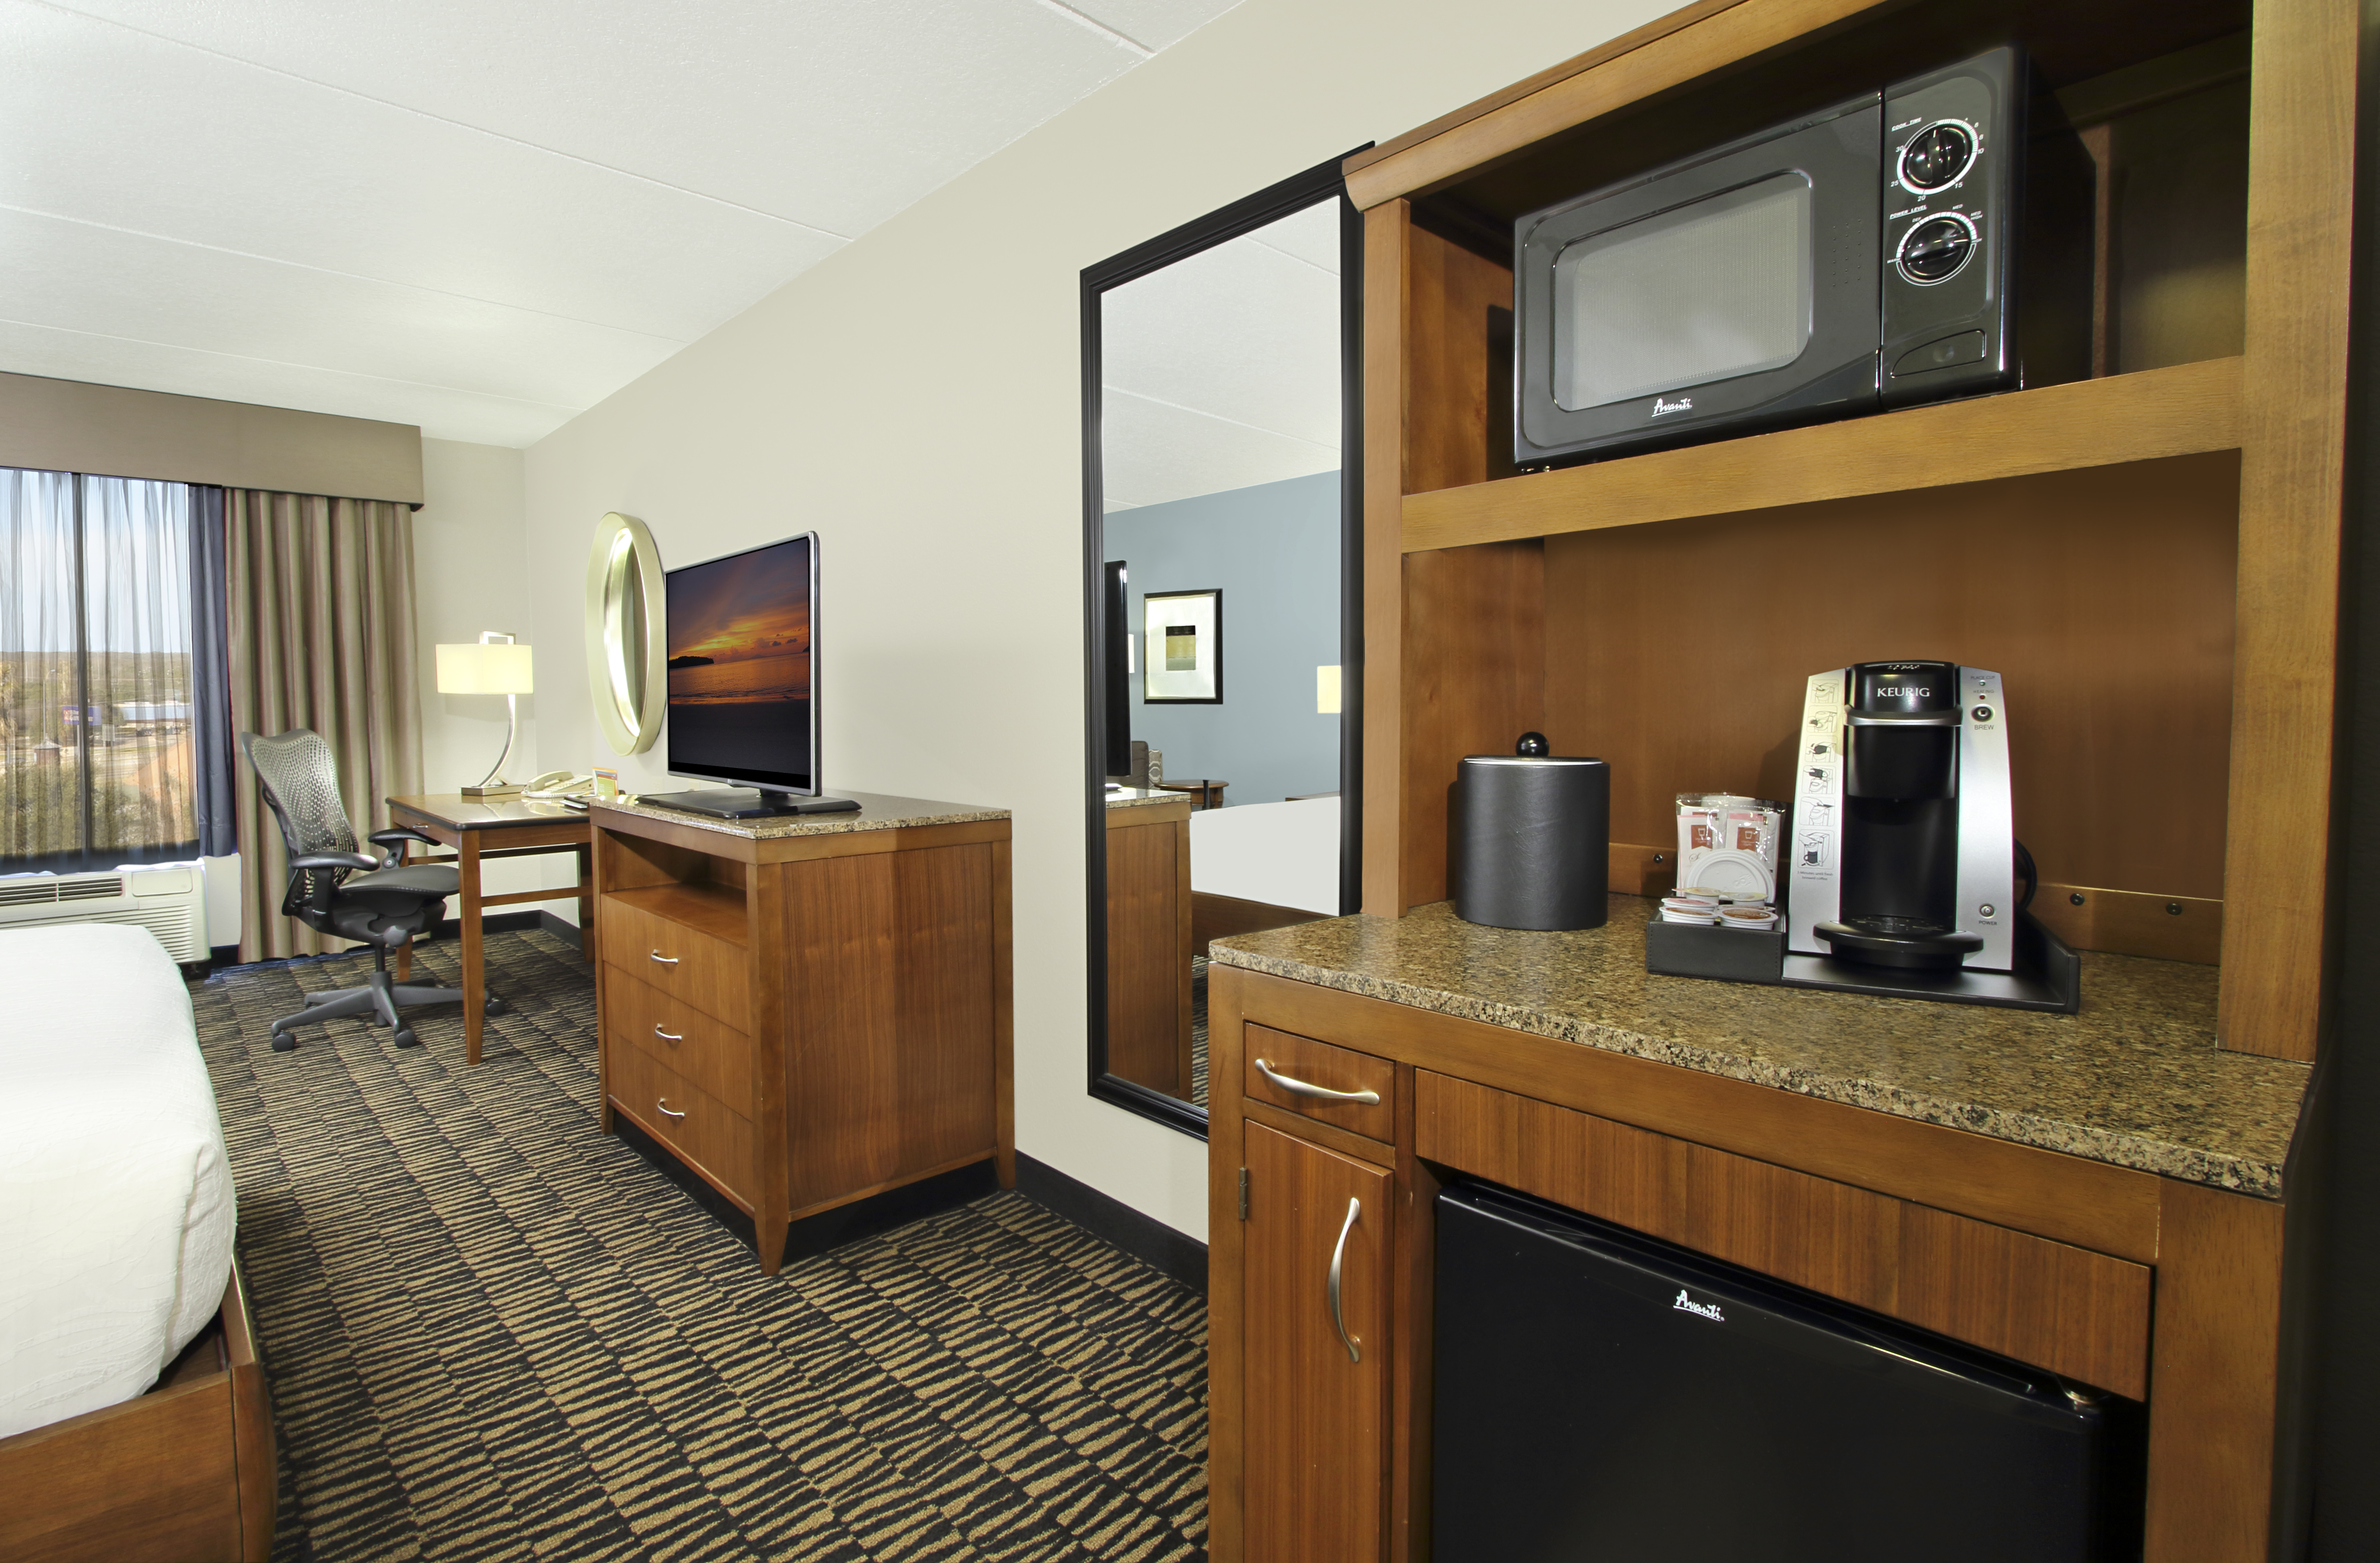 In-room hospitality center with microwave, coffee maker, and fridge with view of TV and work desk.